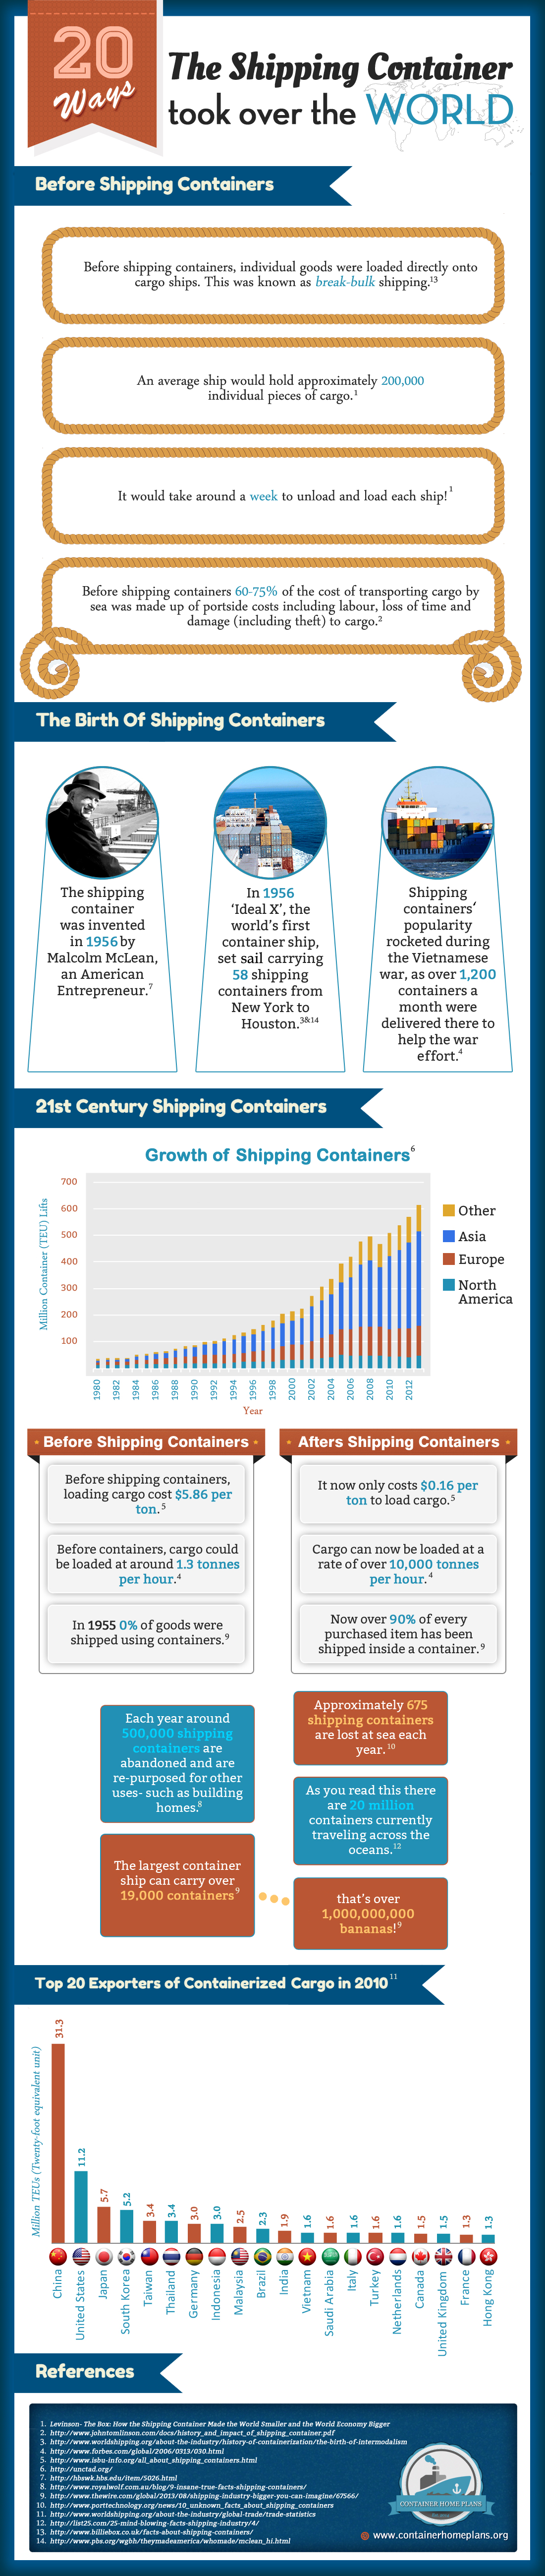 20 Ways The Shipping Container Took Over The World Infographic